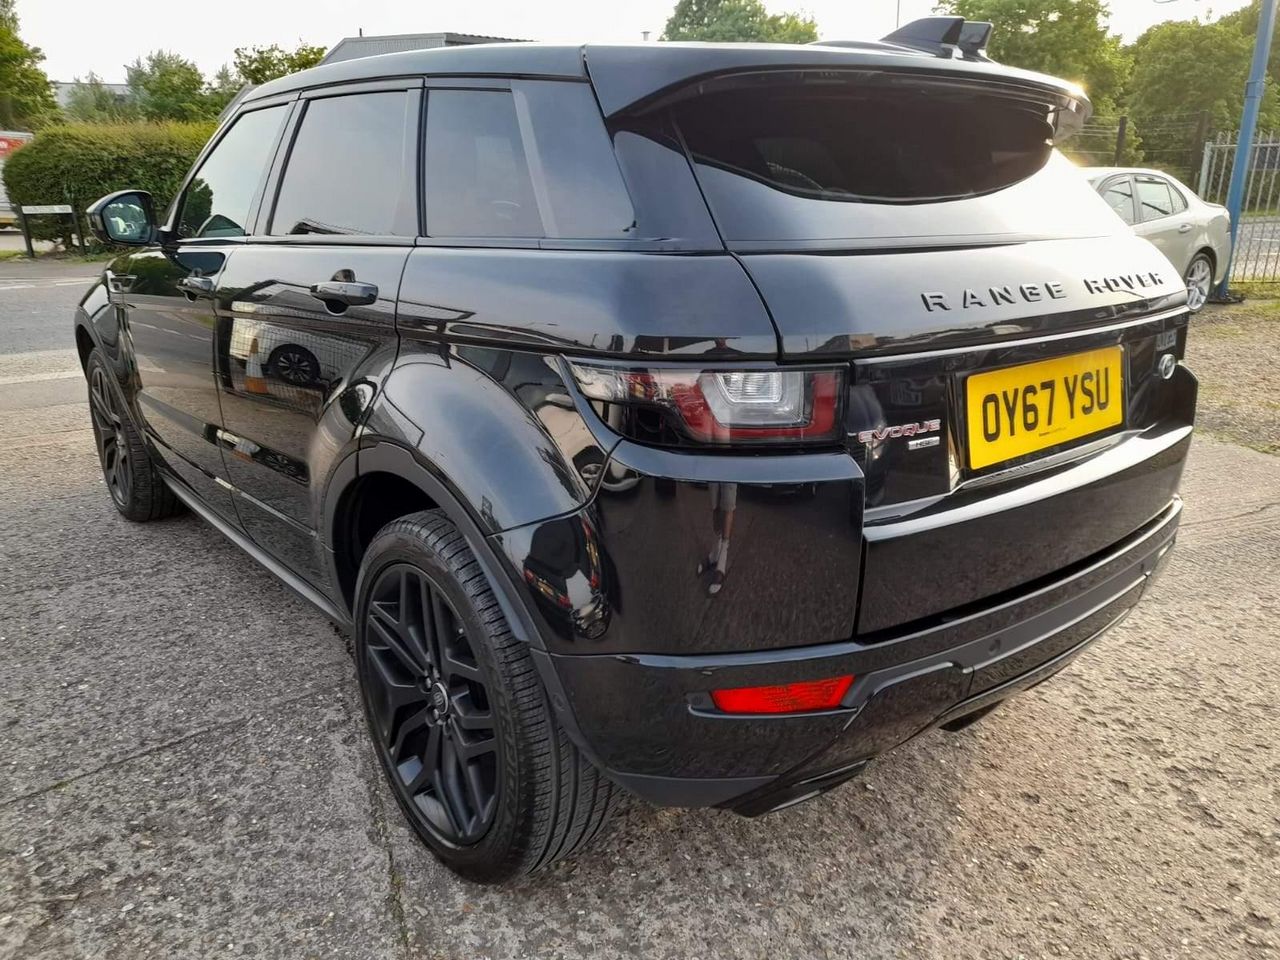 2017 Land Rover Range Rover Evoque 2.0 TD4 HSE Dynamic Auto 4WD Euro 6 (s/s) 5dr - Picture 7 of 53